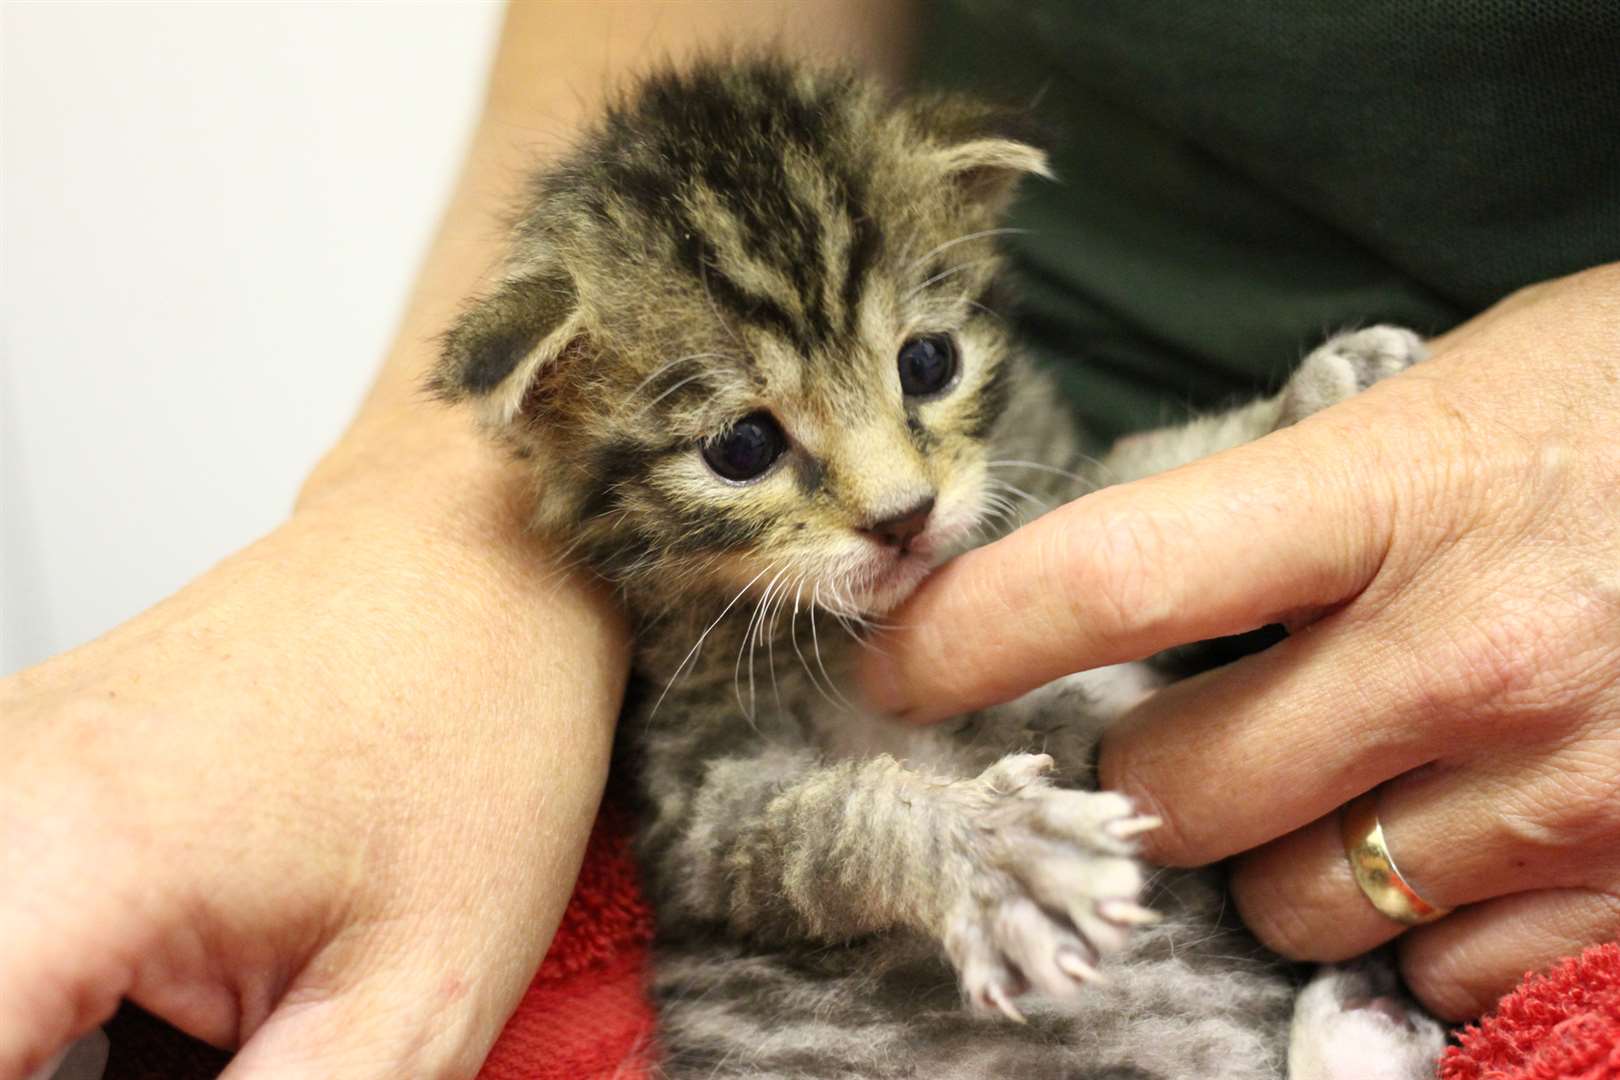 The new wildcat kitten being hand-reared at Wildwood, near Herne.